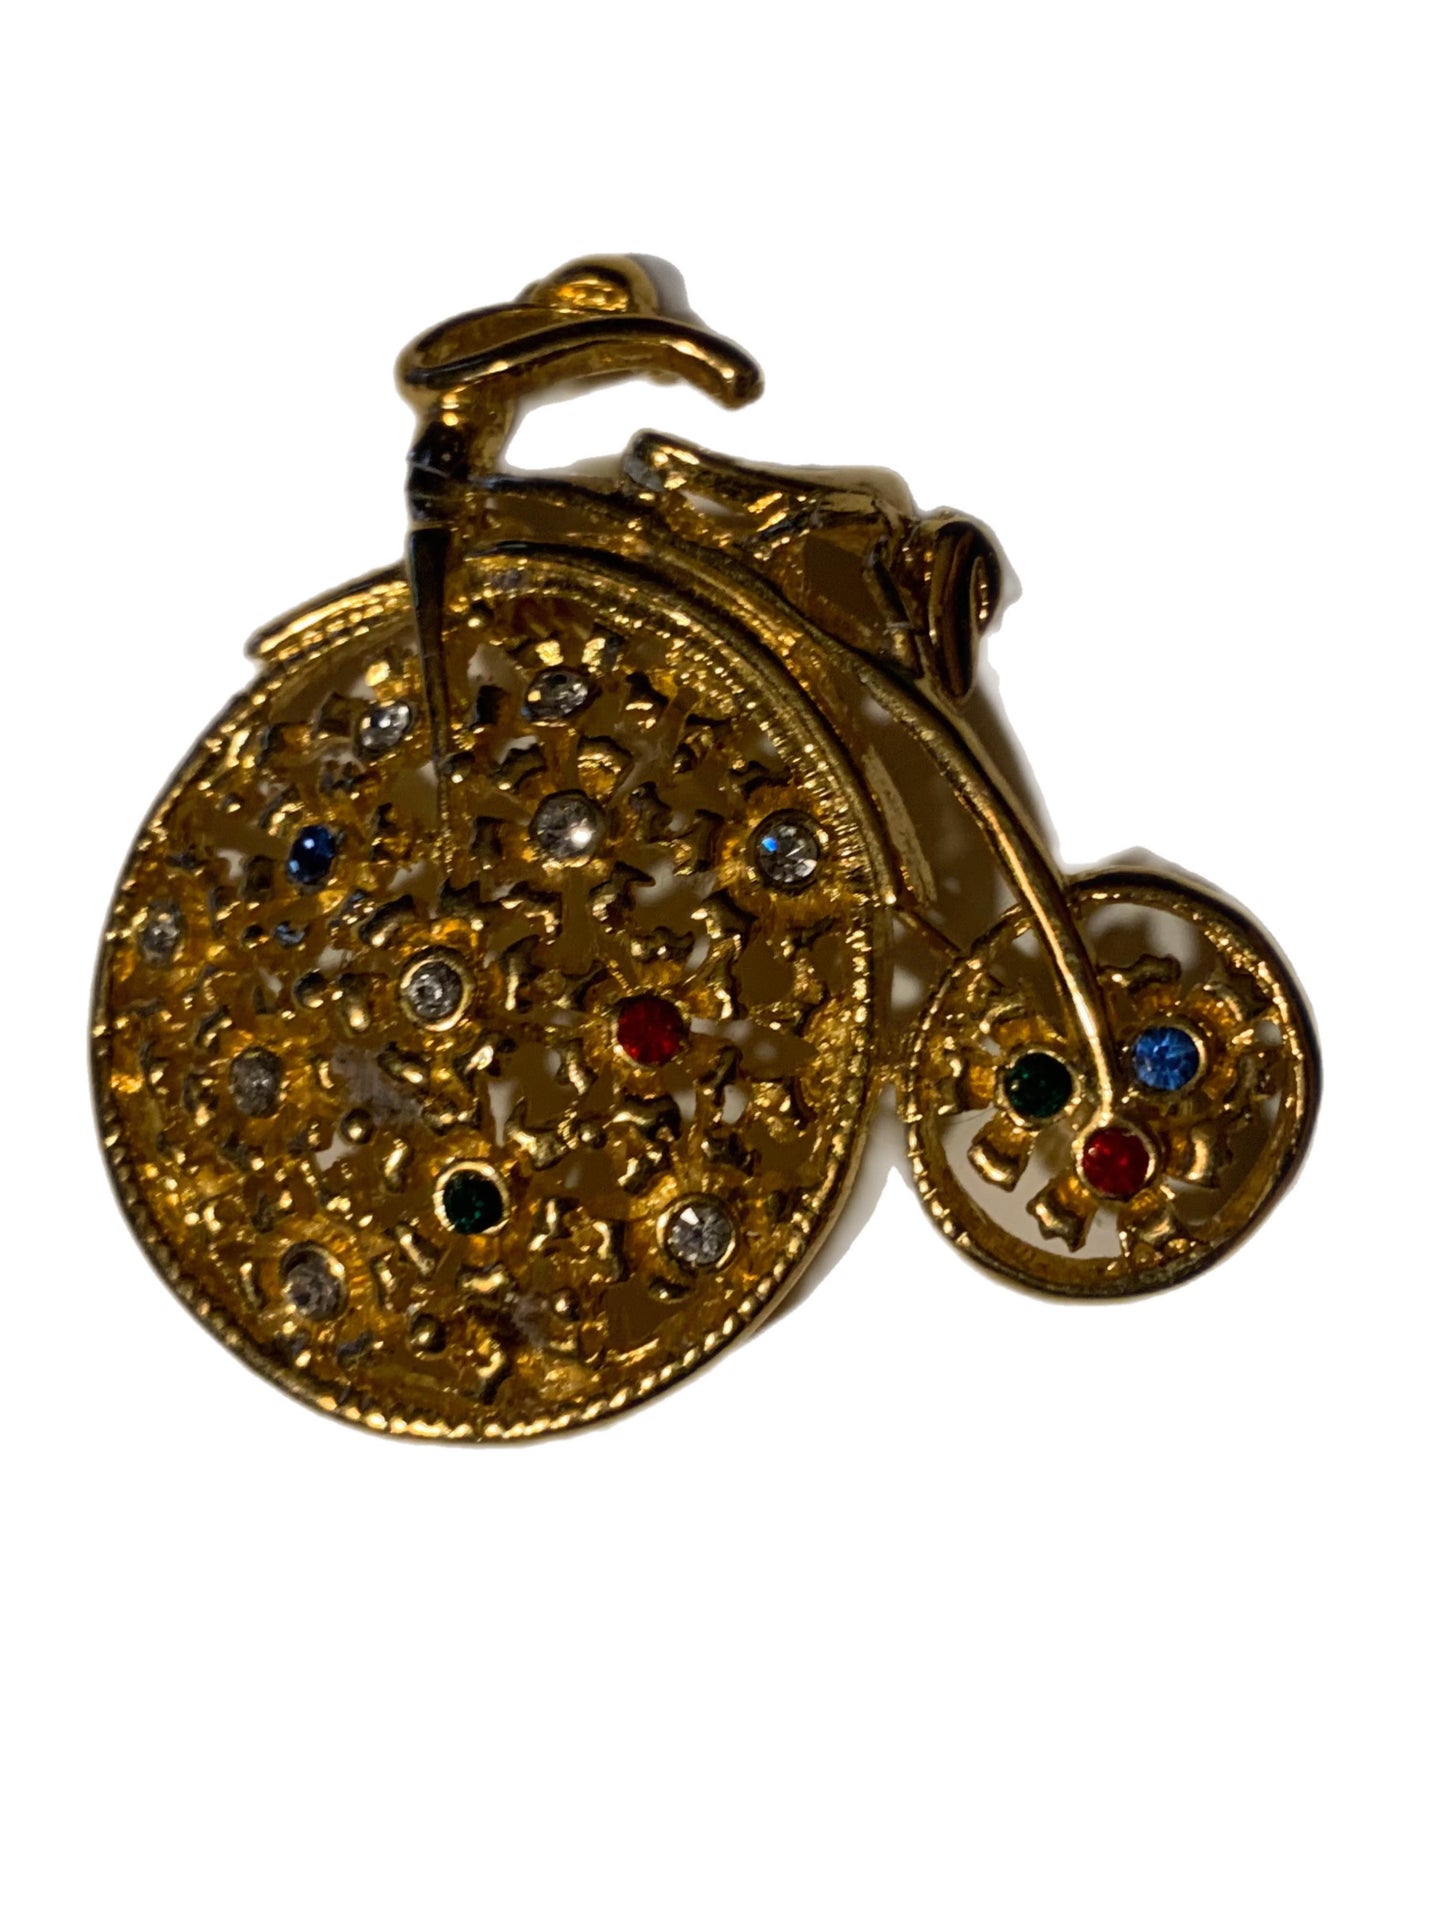 Whimsical Penny Farthing Bicycle Brooch with Multicolored Rhinestones circa 1960s